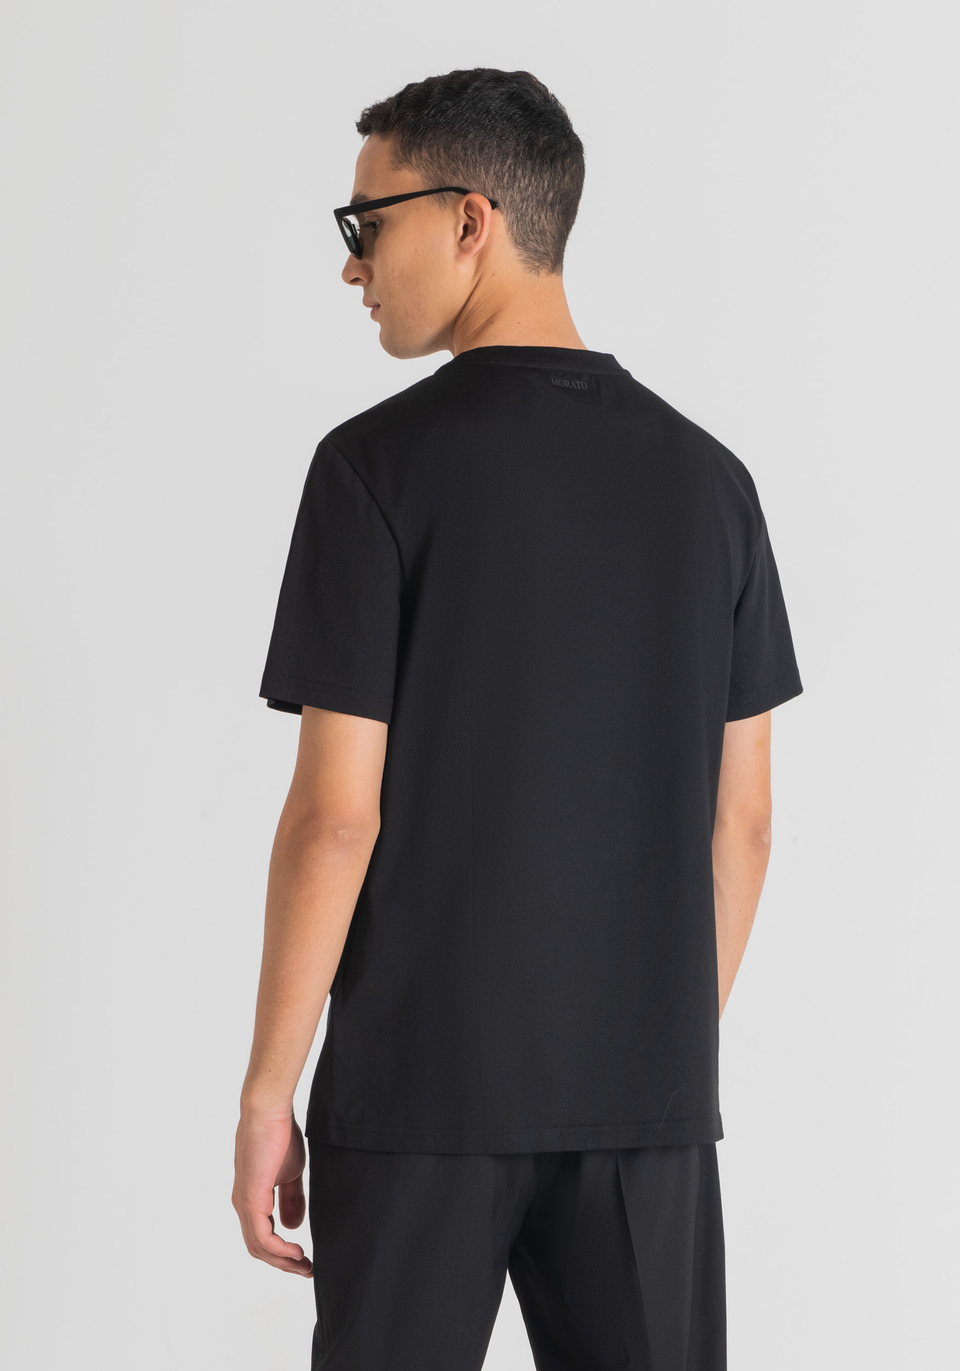 REGULAR-FIT T-SHIRT IN PURE COTTON WITH LOGO PRINT - Antony Morato Online Shop